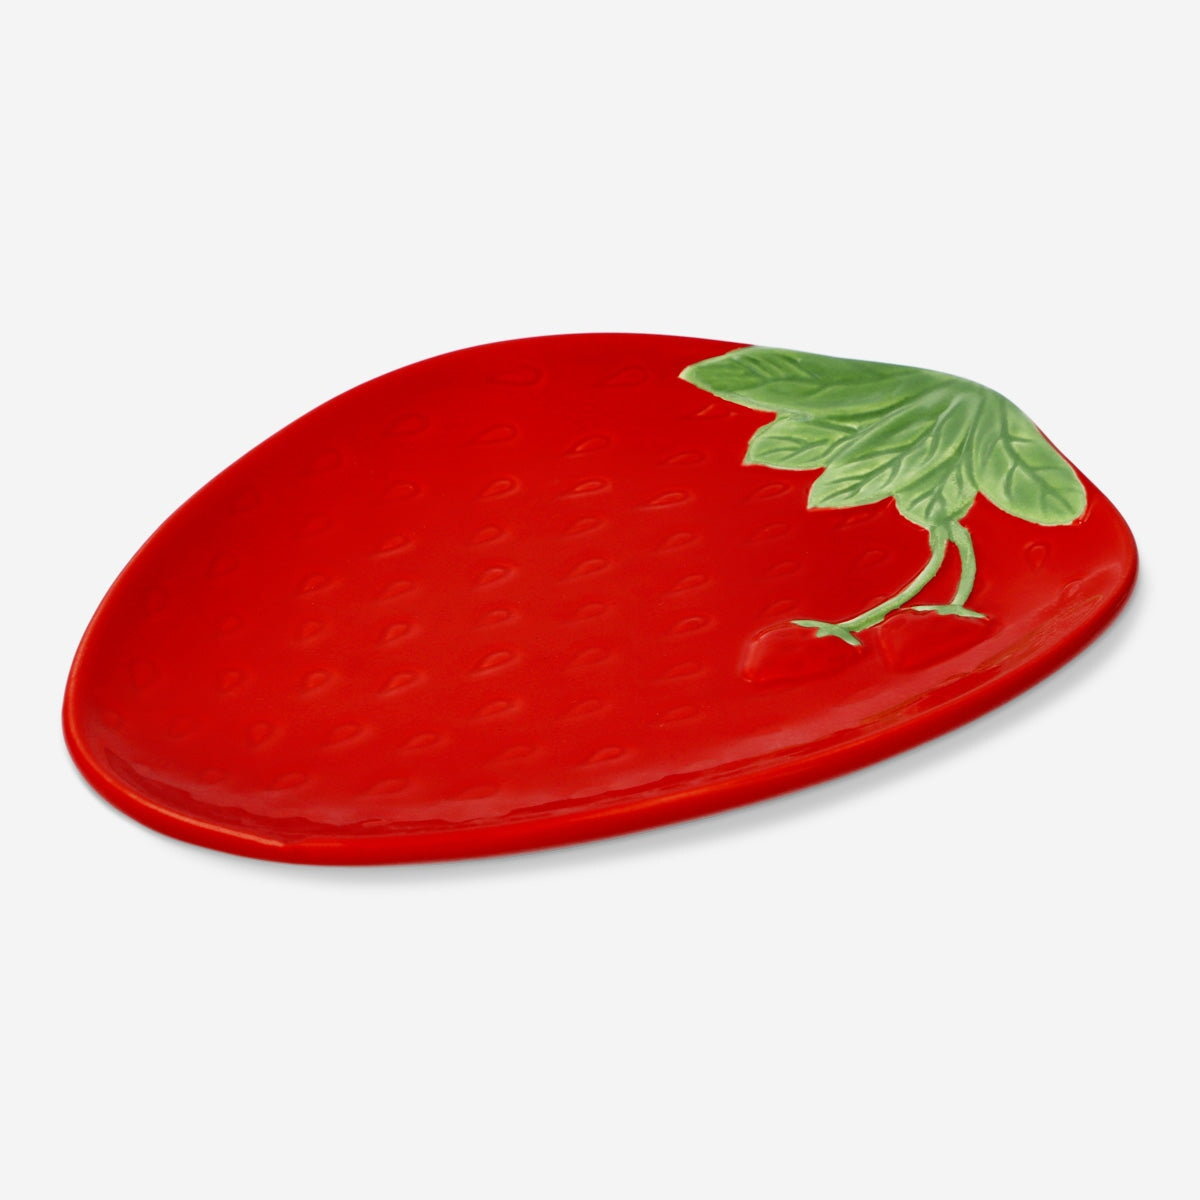 Image of Strawberry serving dish